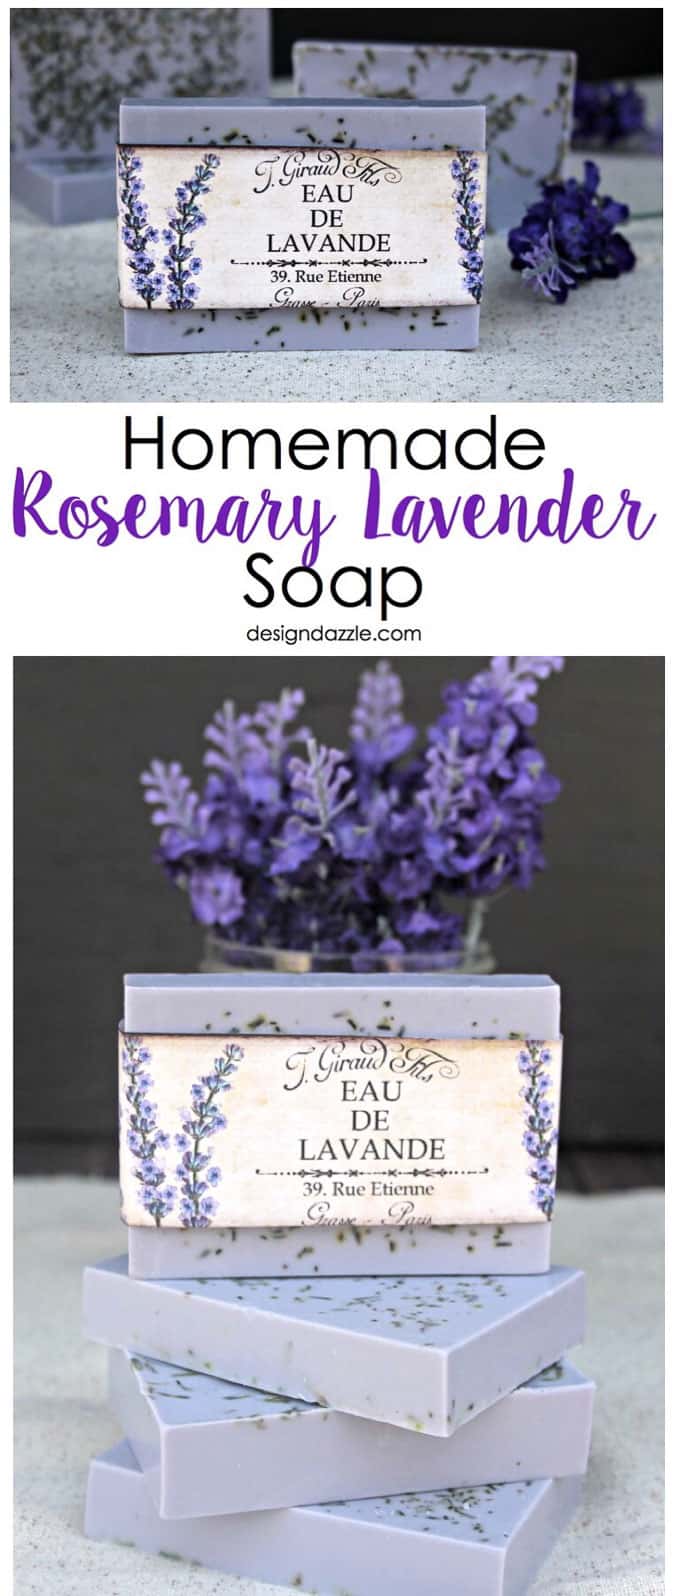 This Homemade Rosemary Lavender Soap recipe is surprisingly simple and turns out absolutely gorgeous every time you make it! 